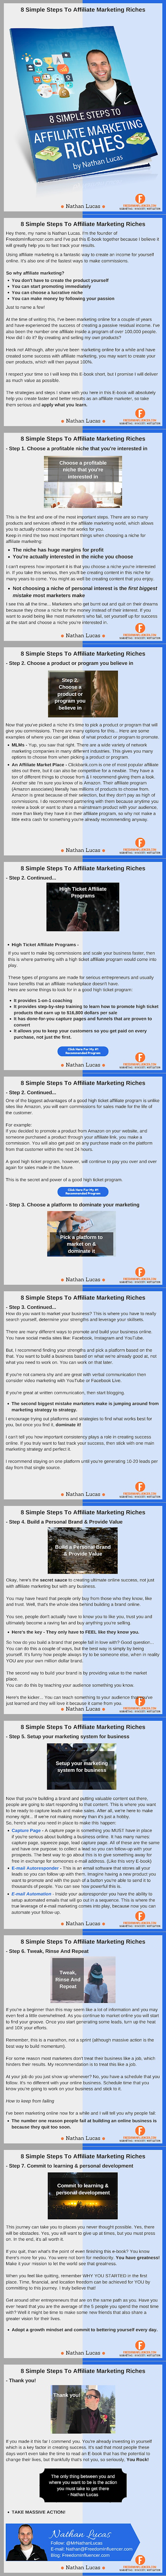 How to become rich with affiliate marketing in 8 simple steps